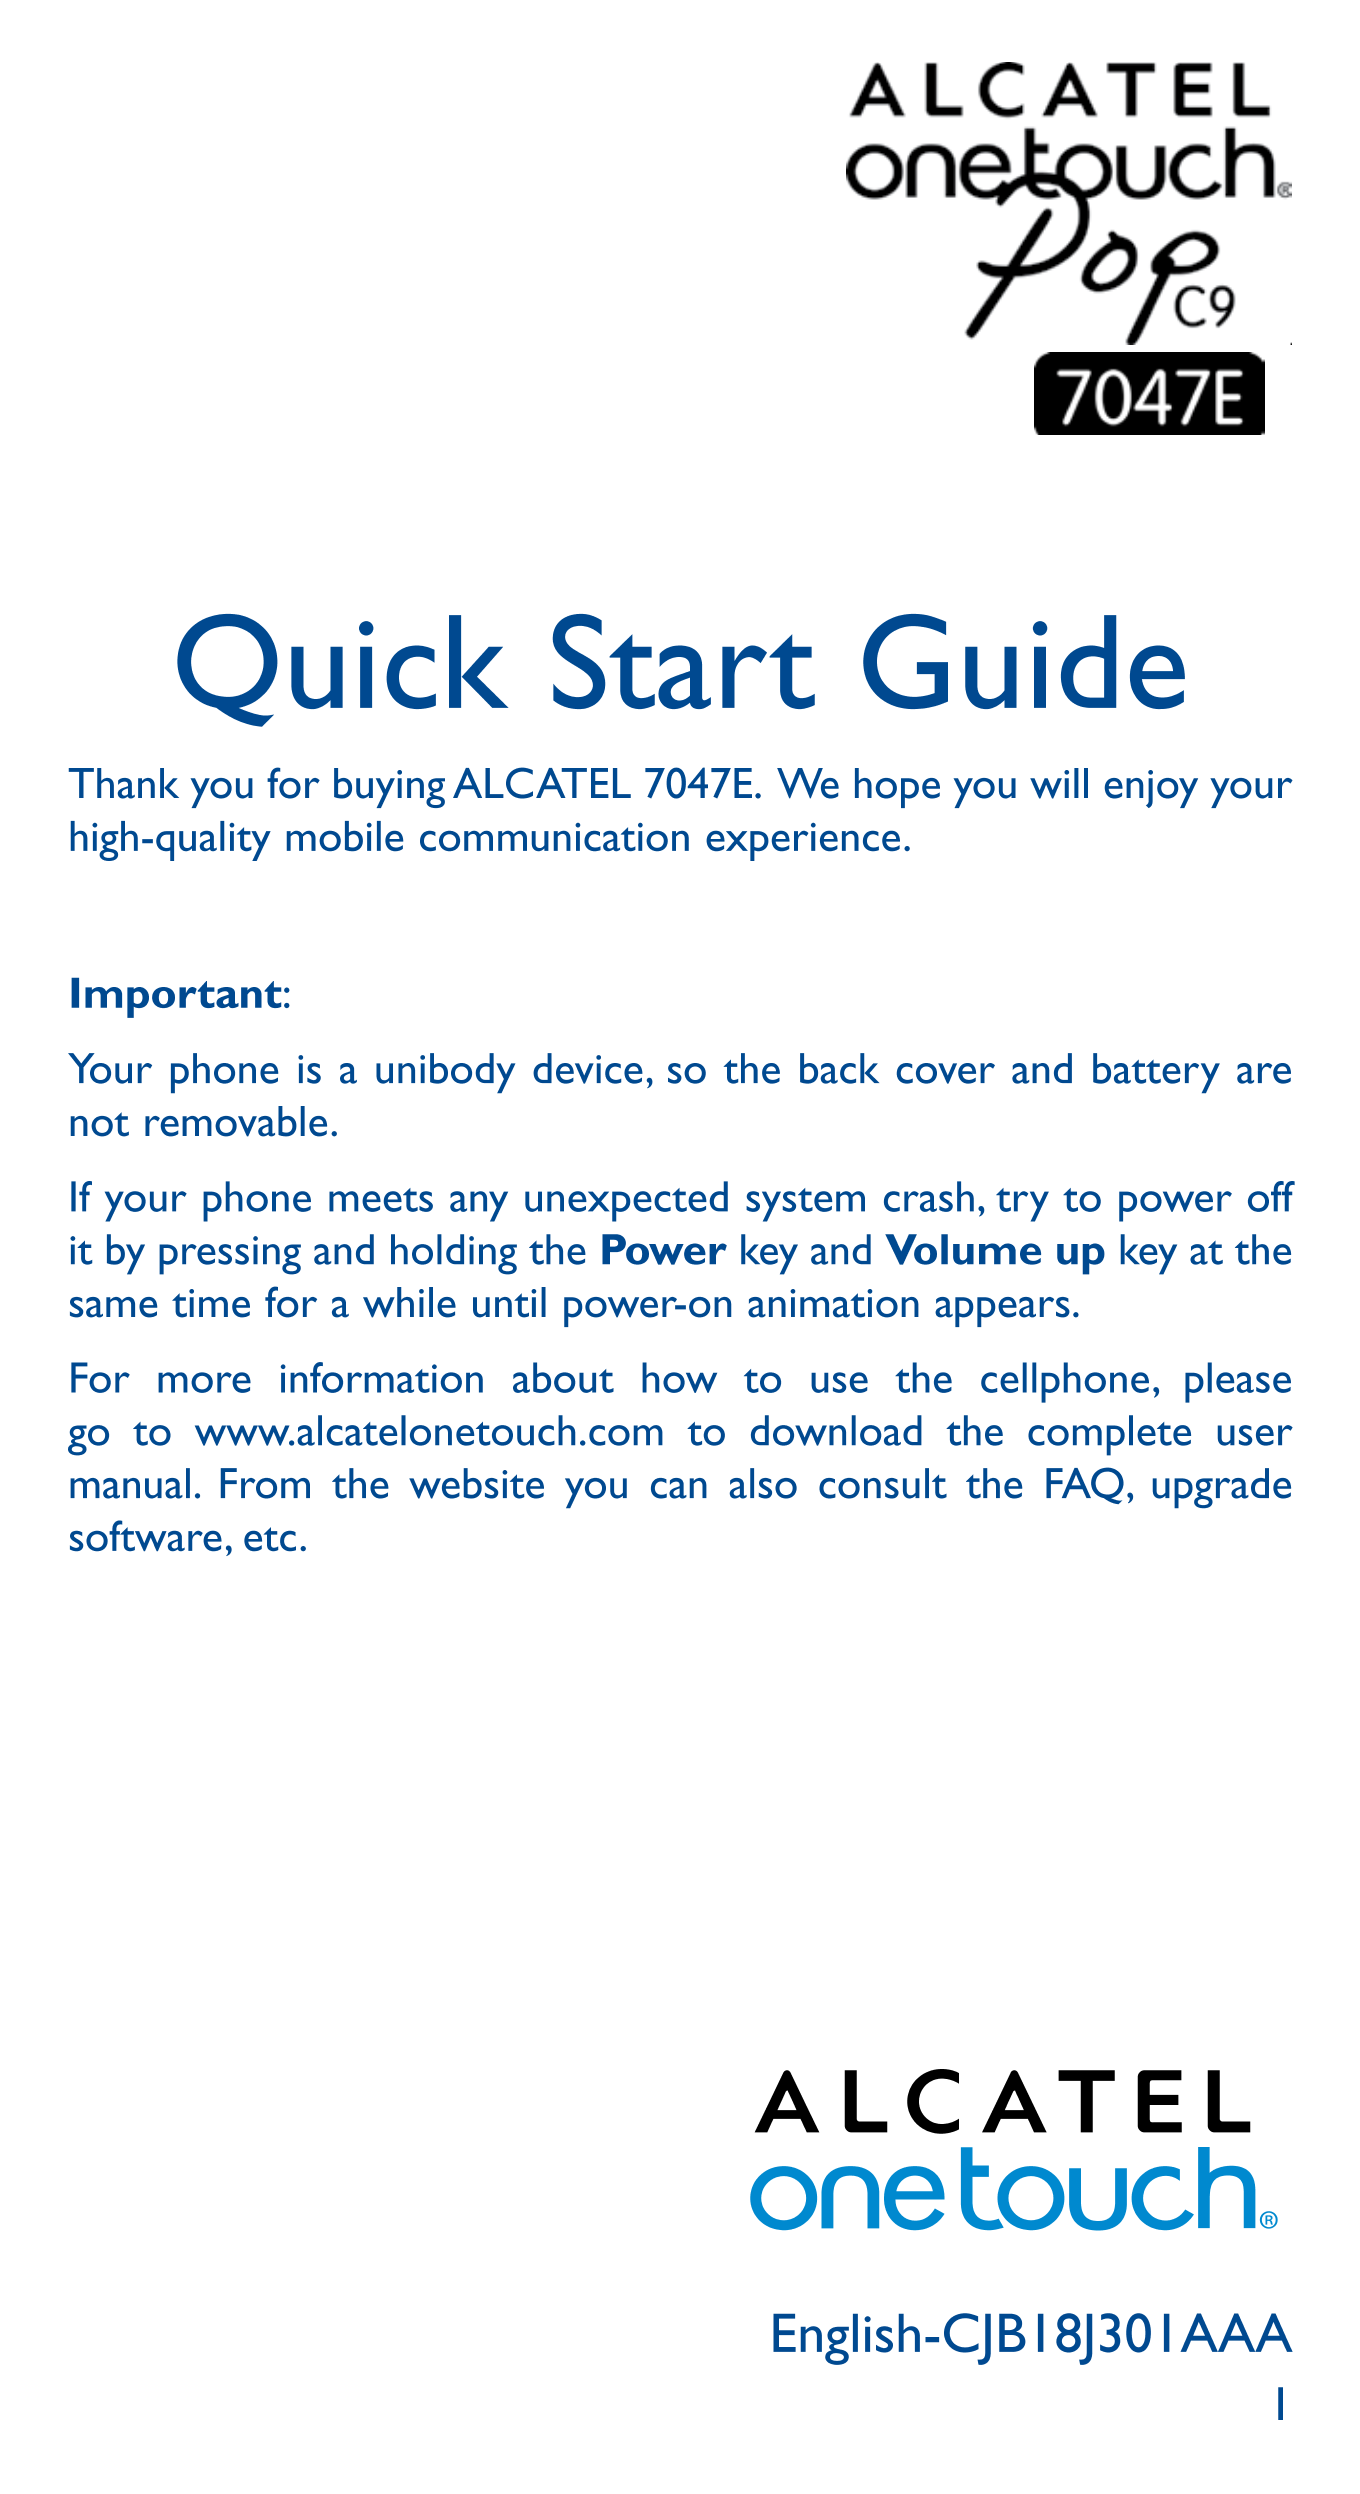 Quick Start Guide
Thank you for buying ALCATEL 7047E.  We hope you will enjoy your 
high-quality mobile communication experience